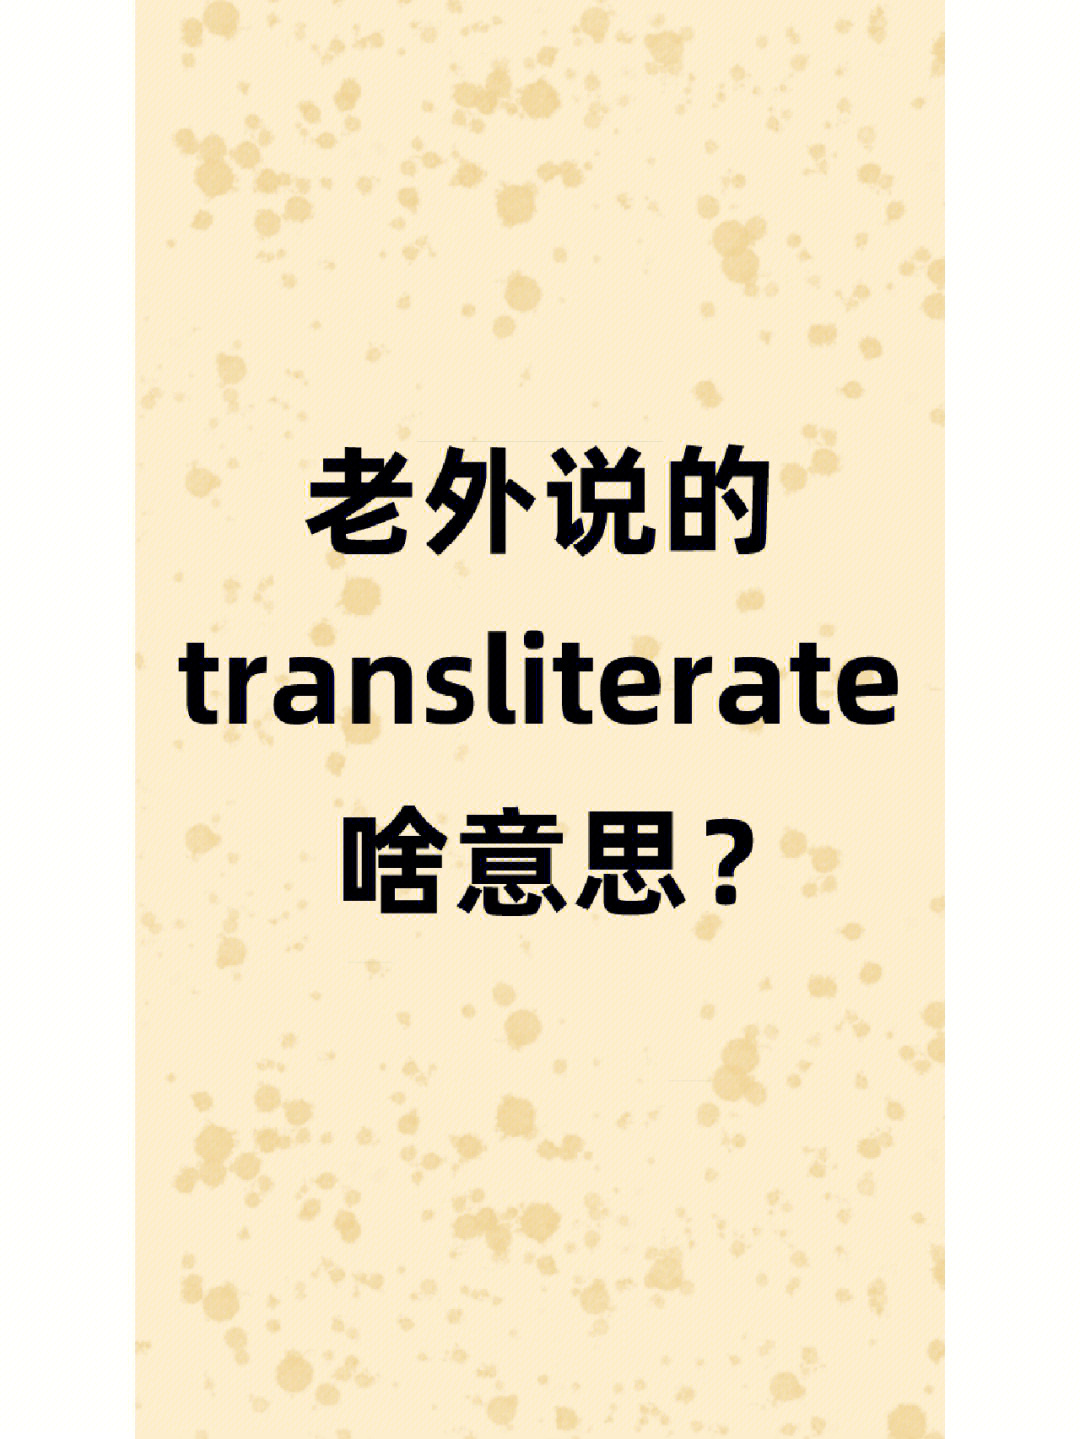 to use pinyin, a phonetic system used to transliterate chinese